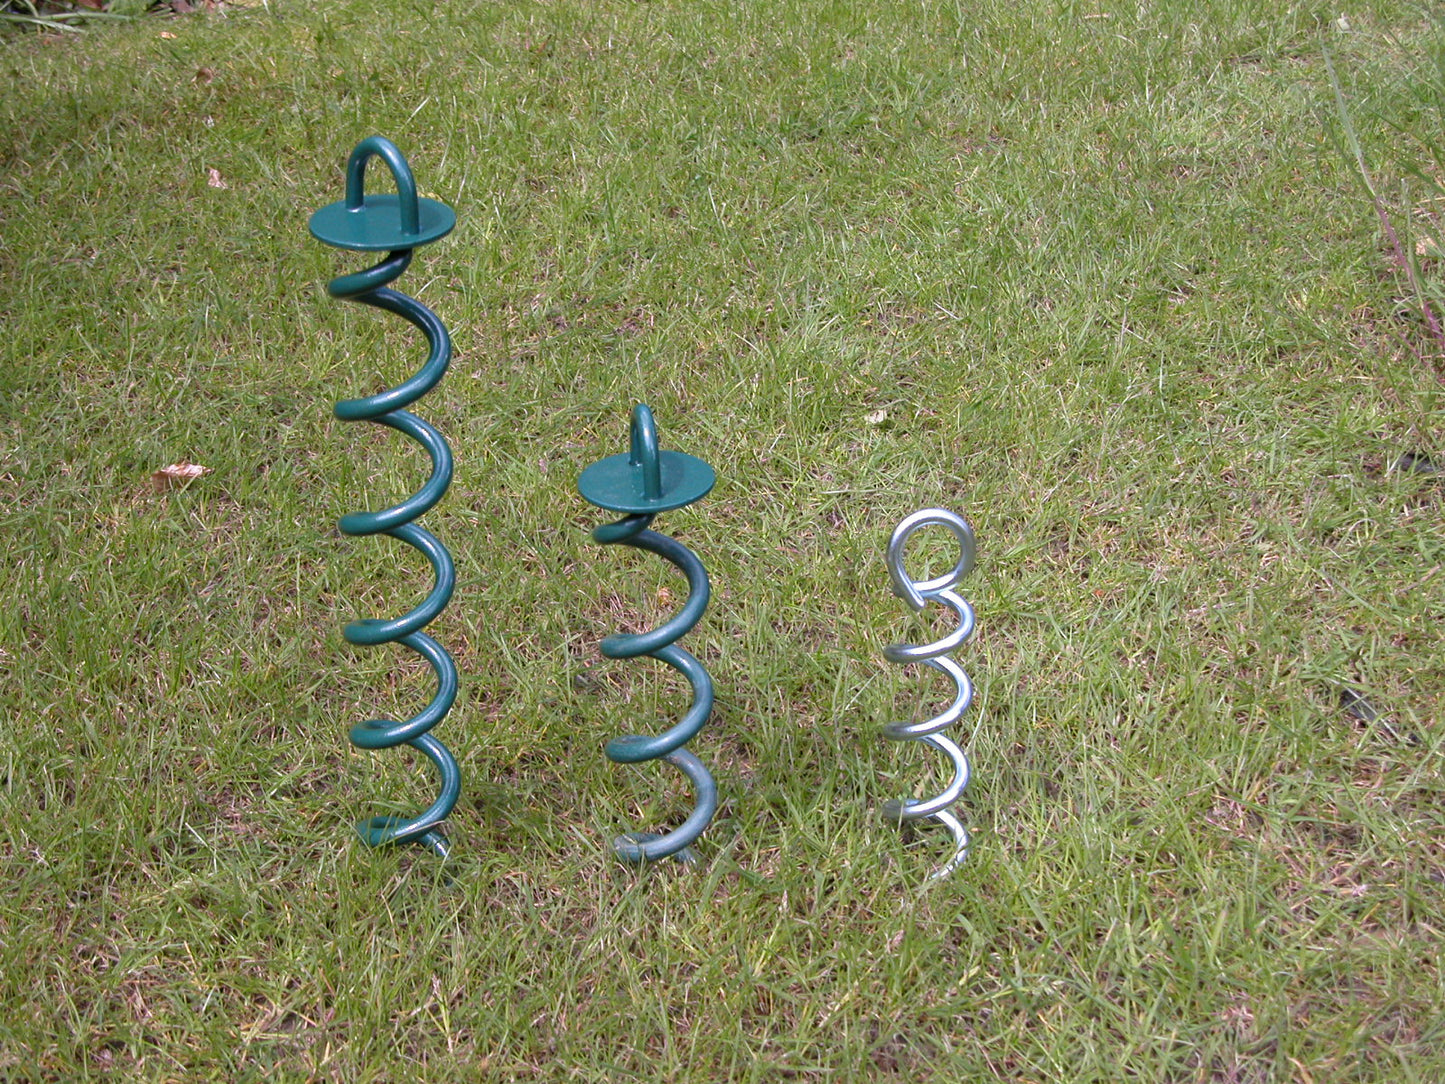 200mm, 250mm and 400mm Ground Anchors